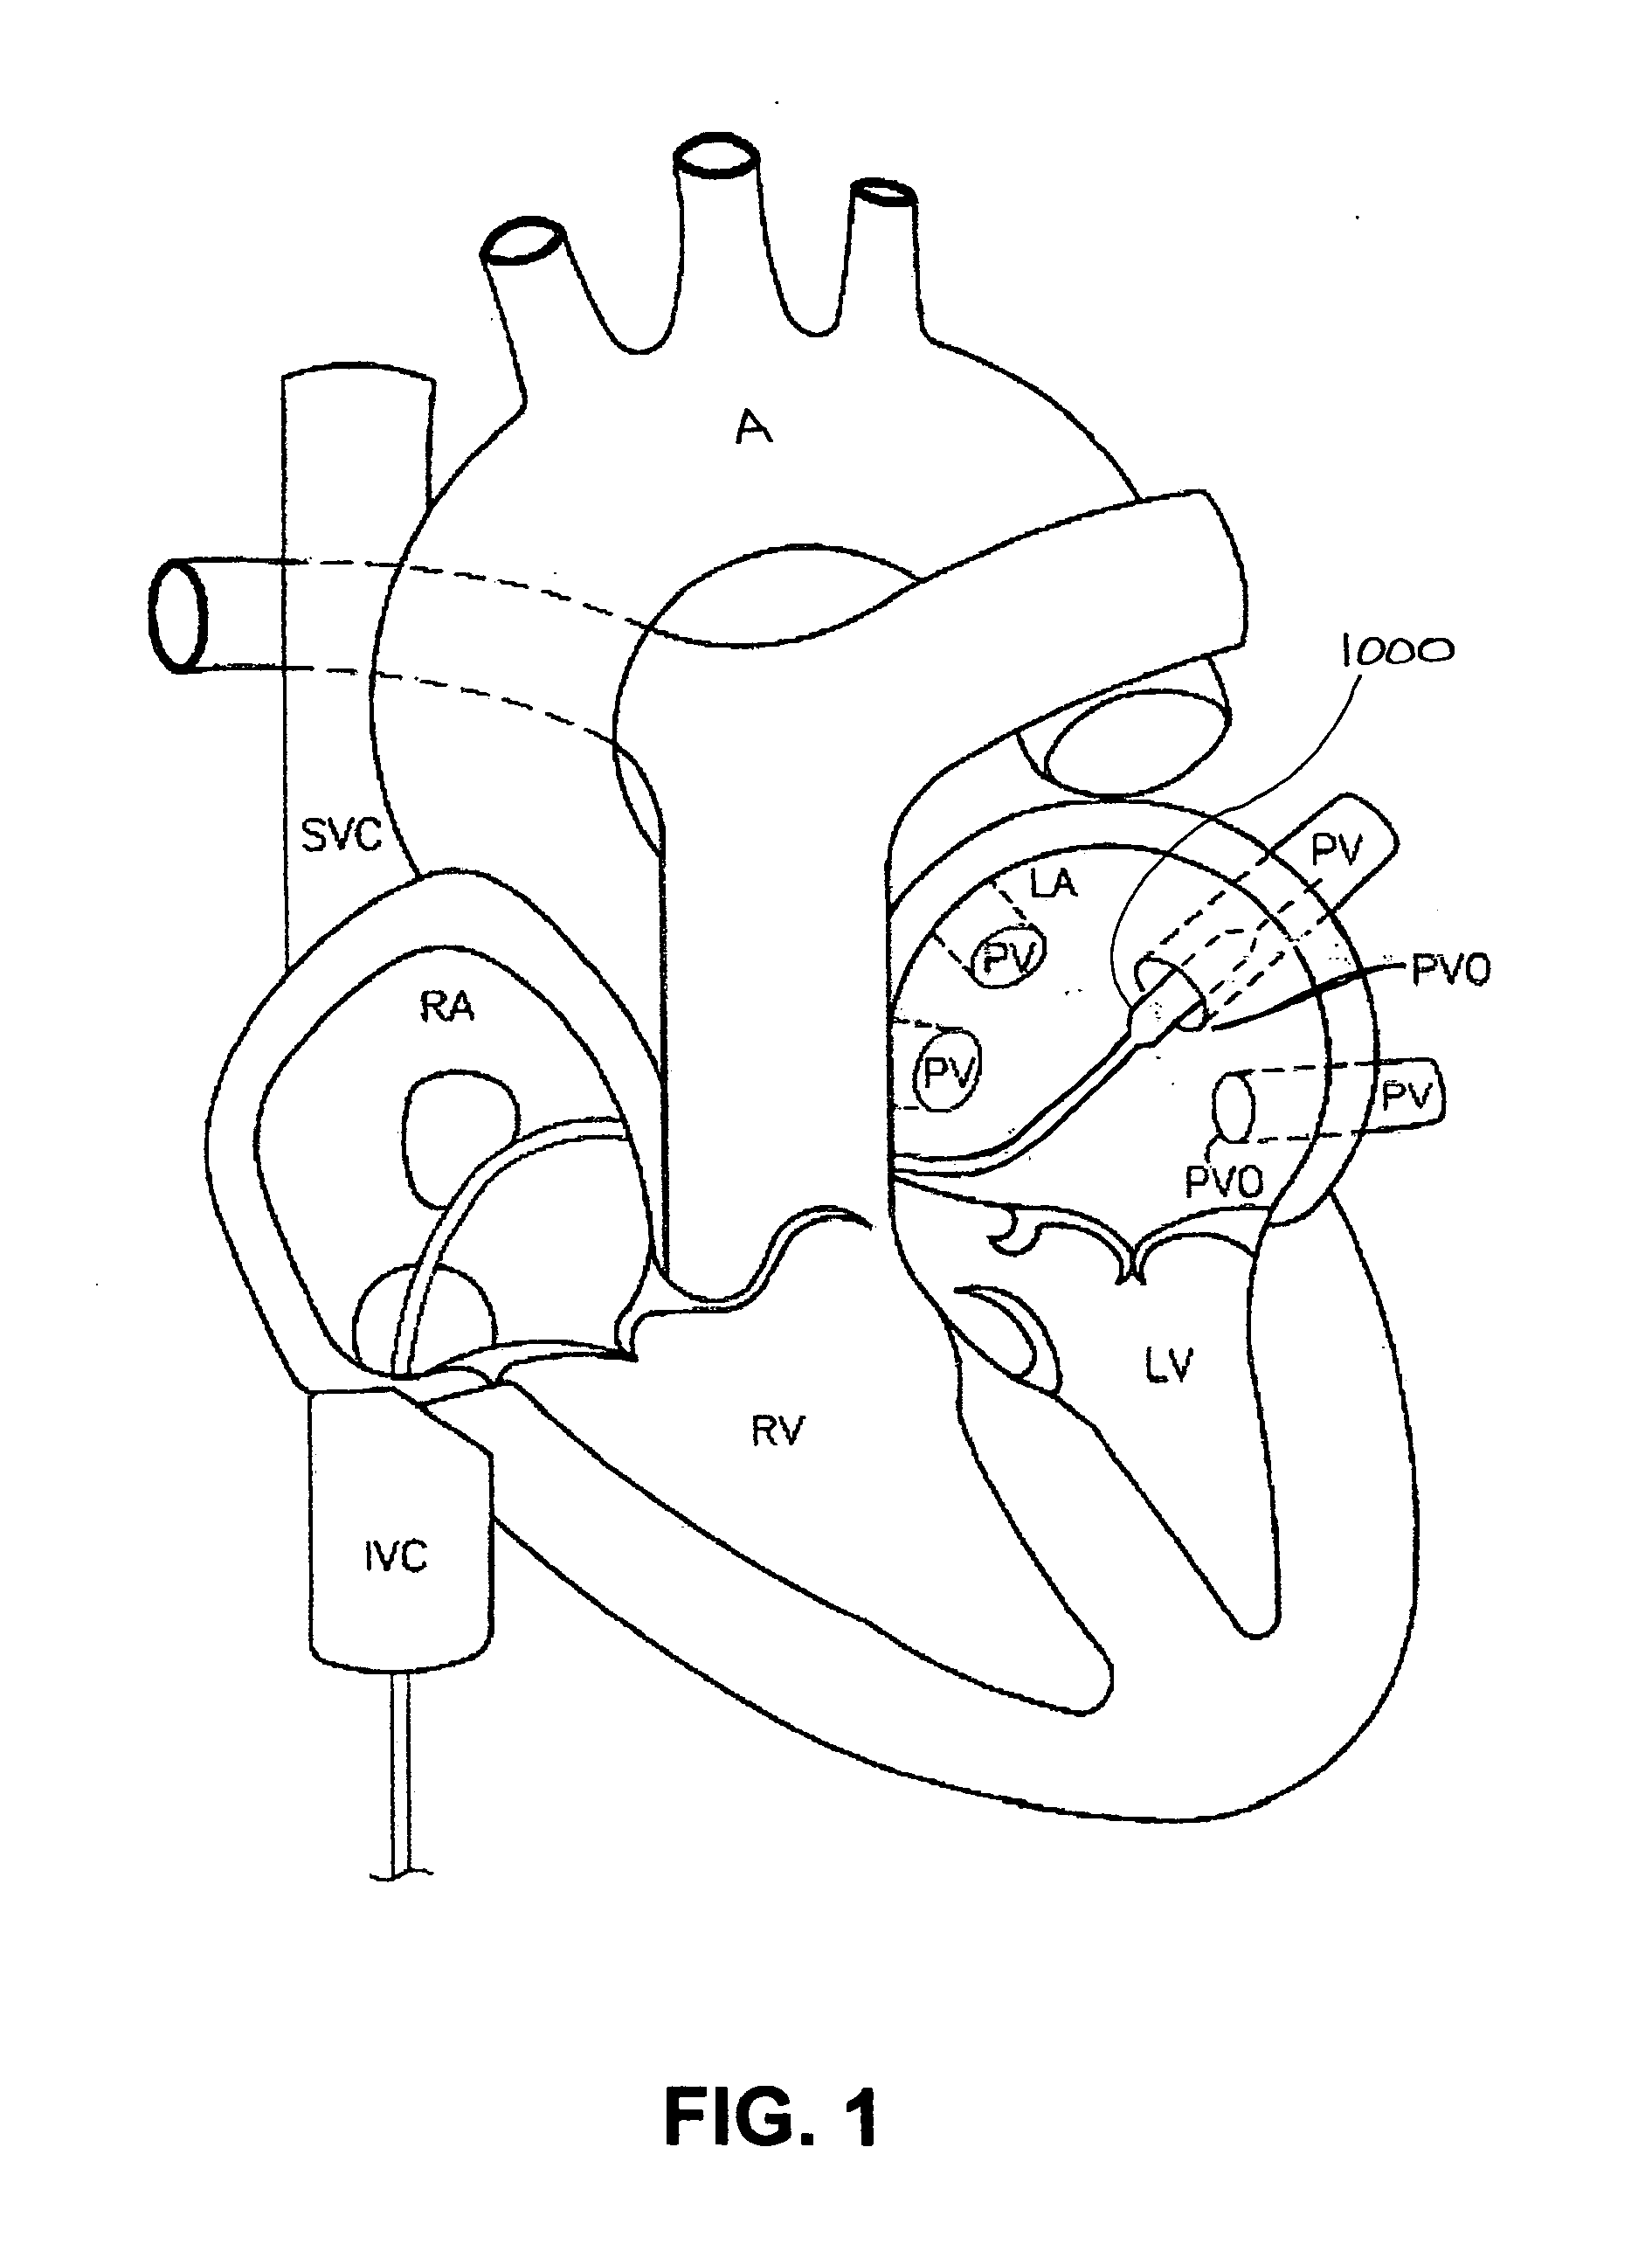 Devices and methods for denervation of the nerves surrounding the pulmonary veins for treatment of atrial fibrillation